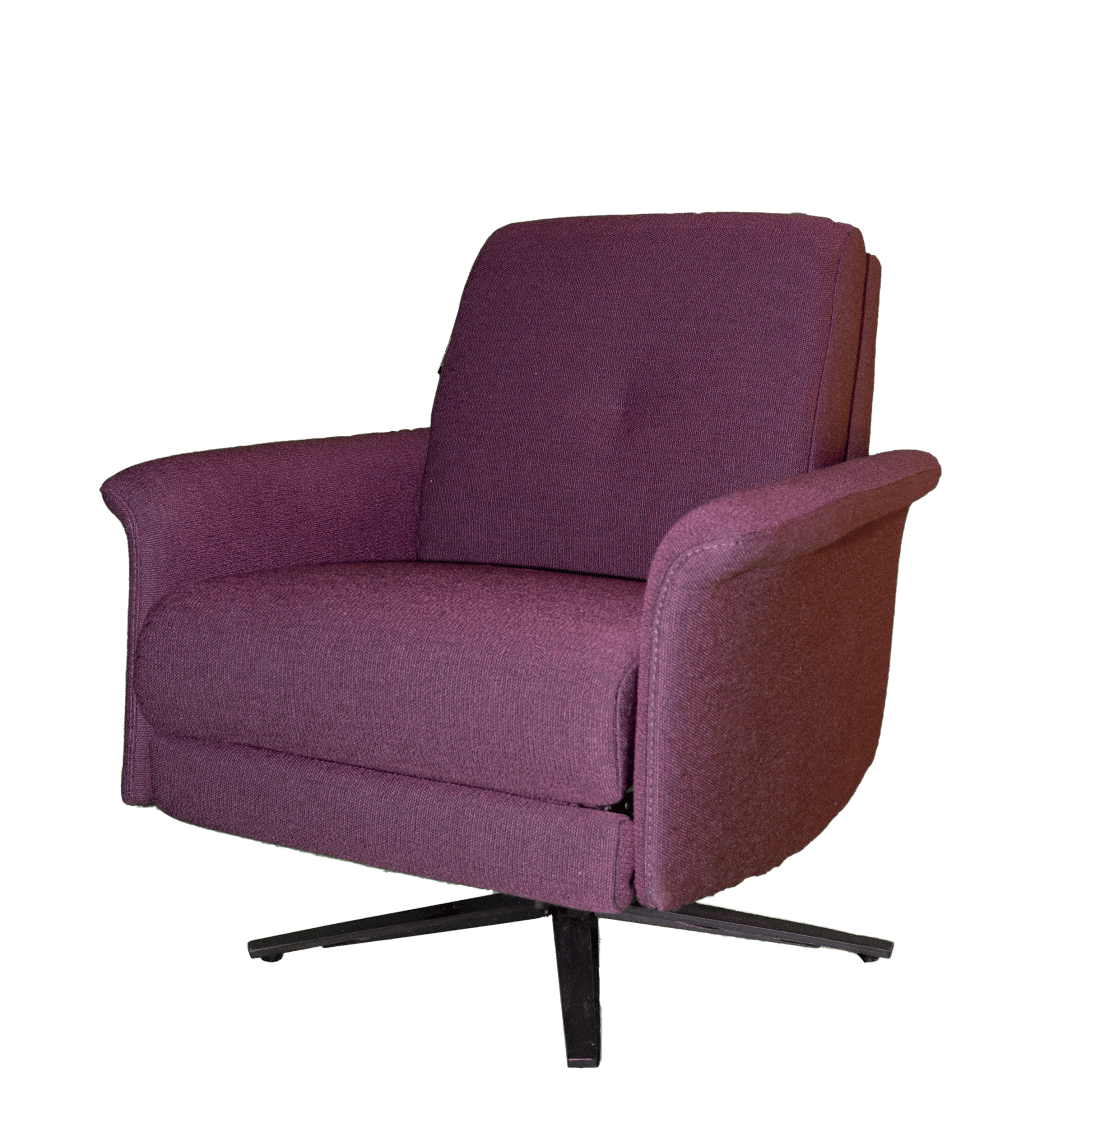 Relaxfauteuil 7700 23 L14